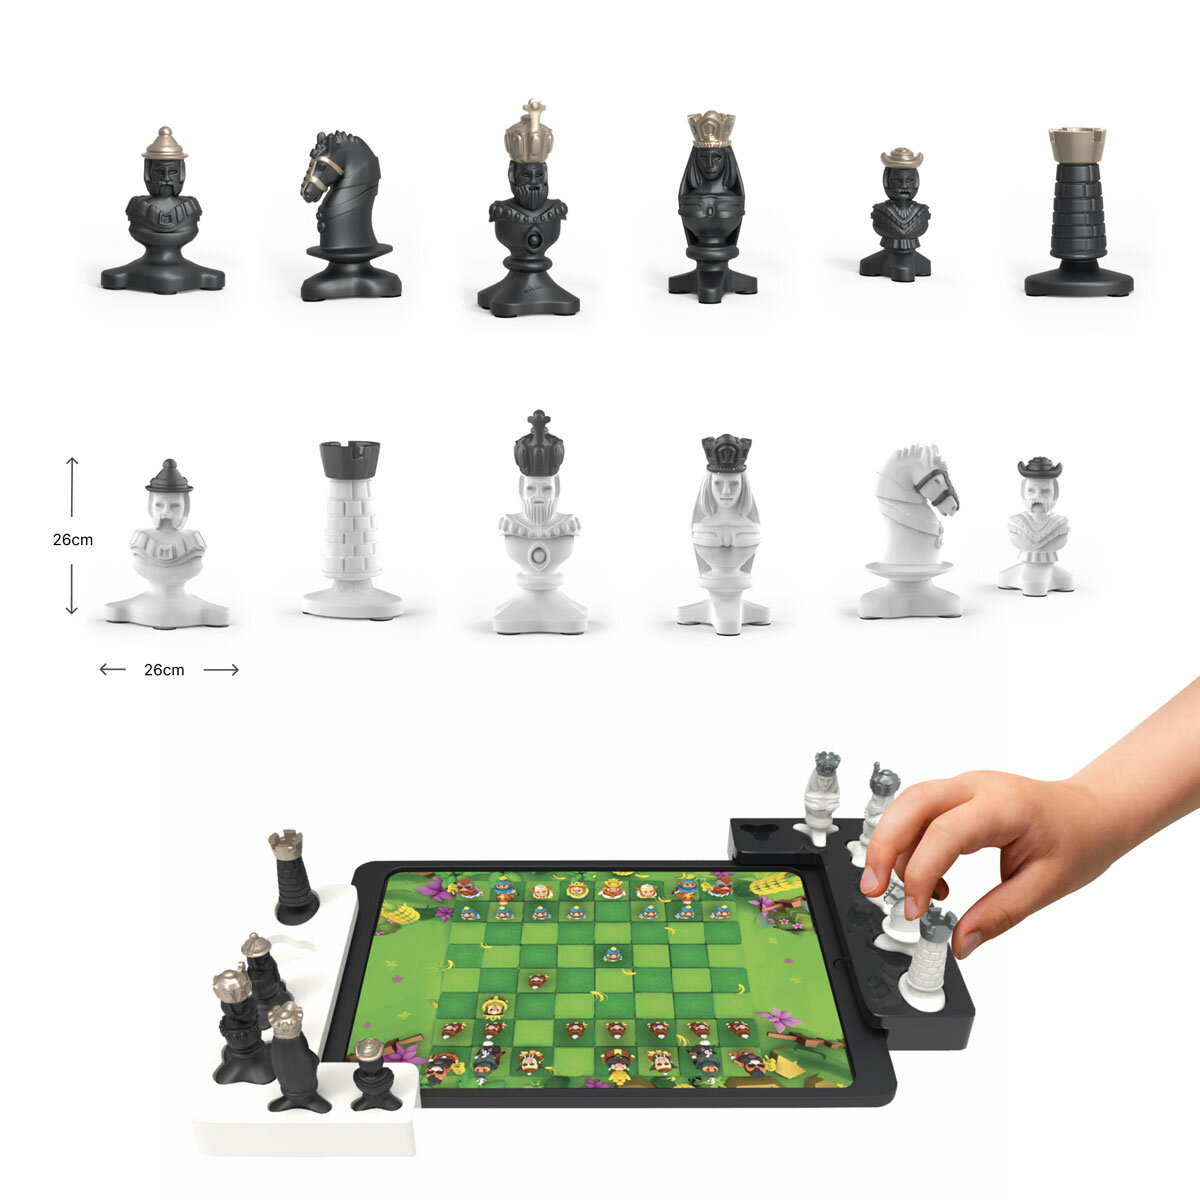 Buy Tacto Chess Dimensions Image at Costco.co.uk